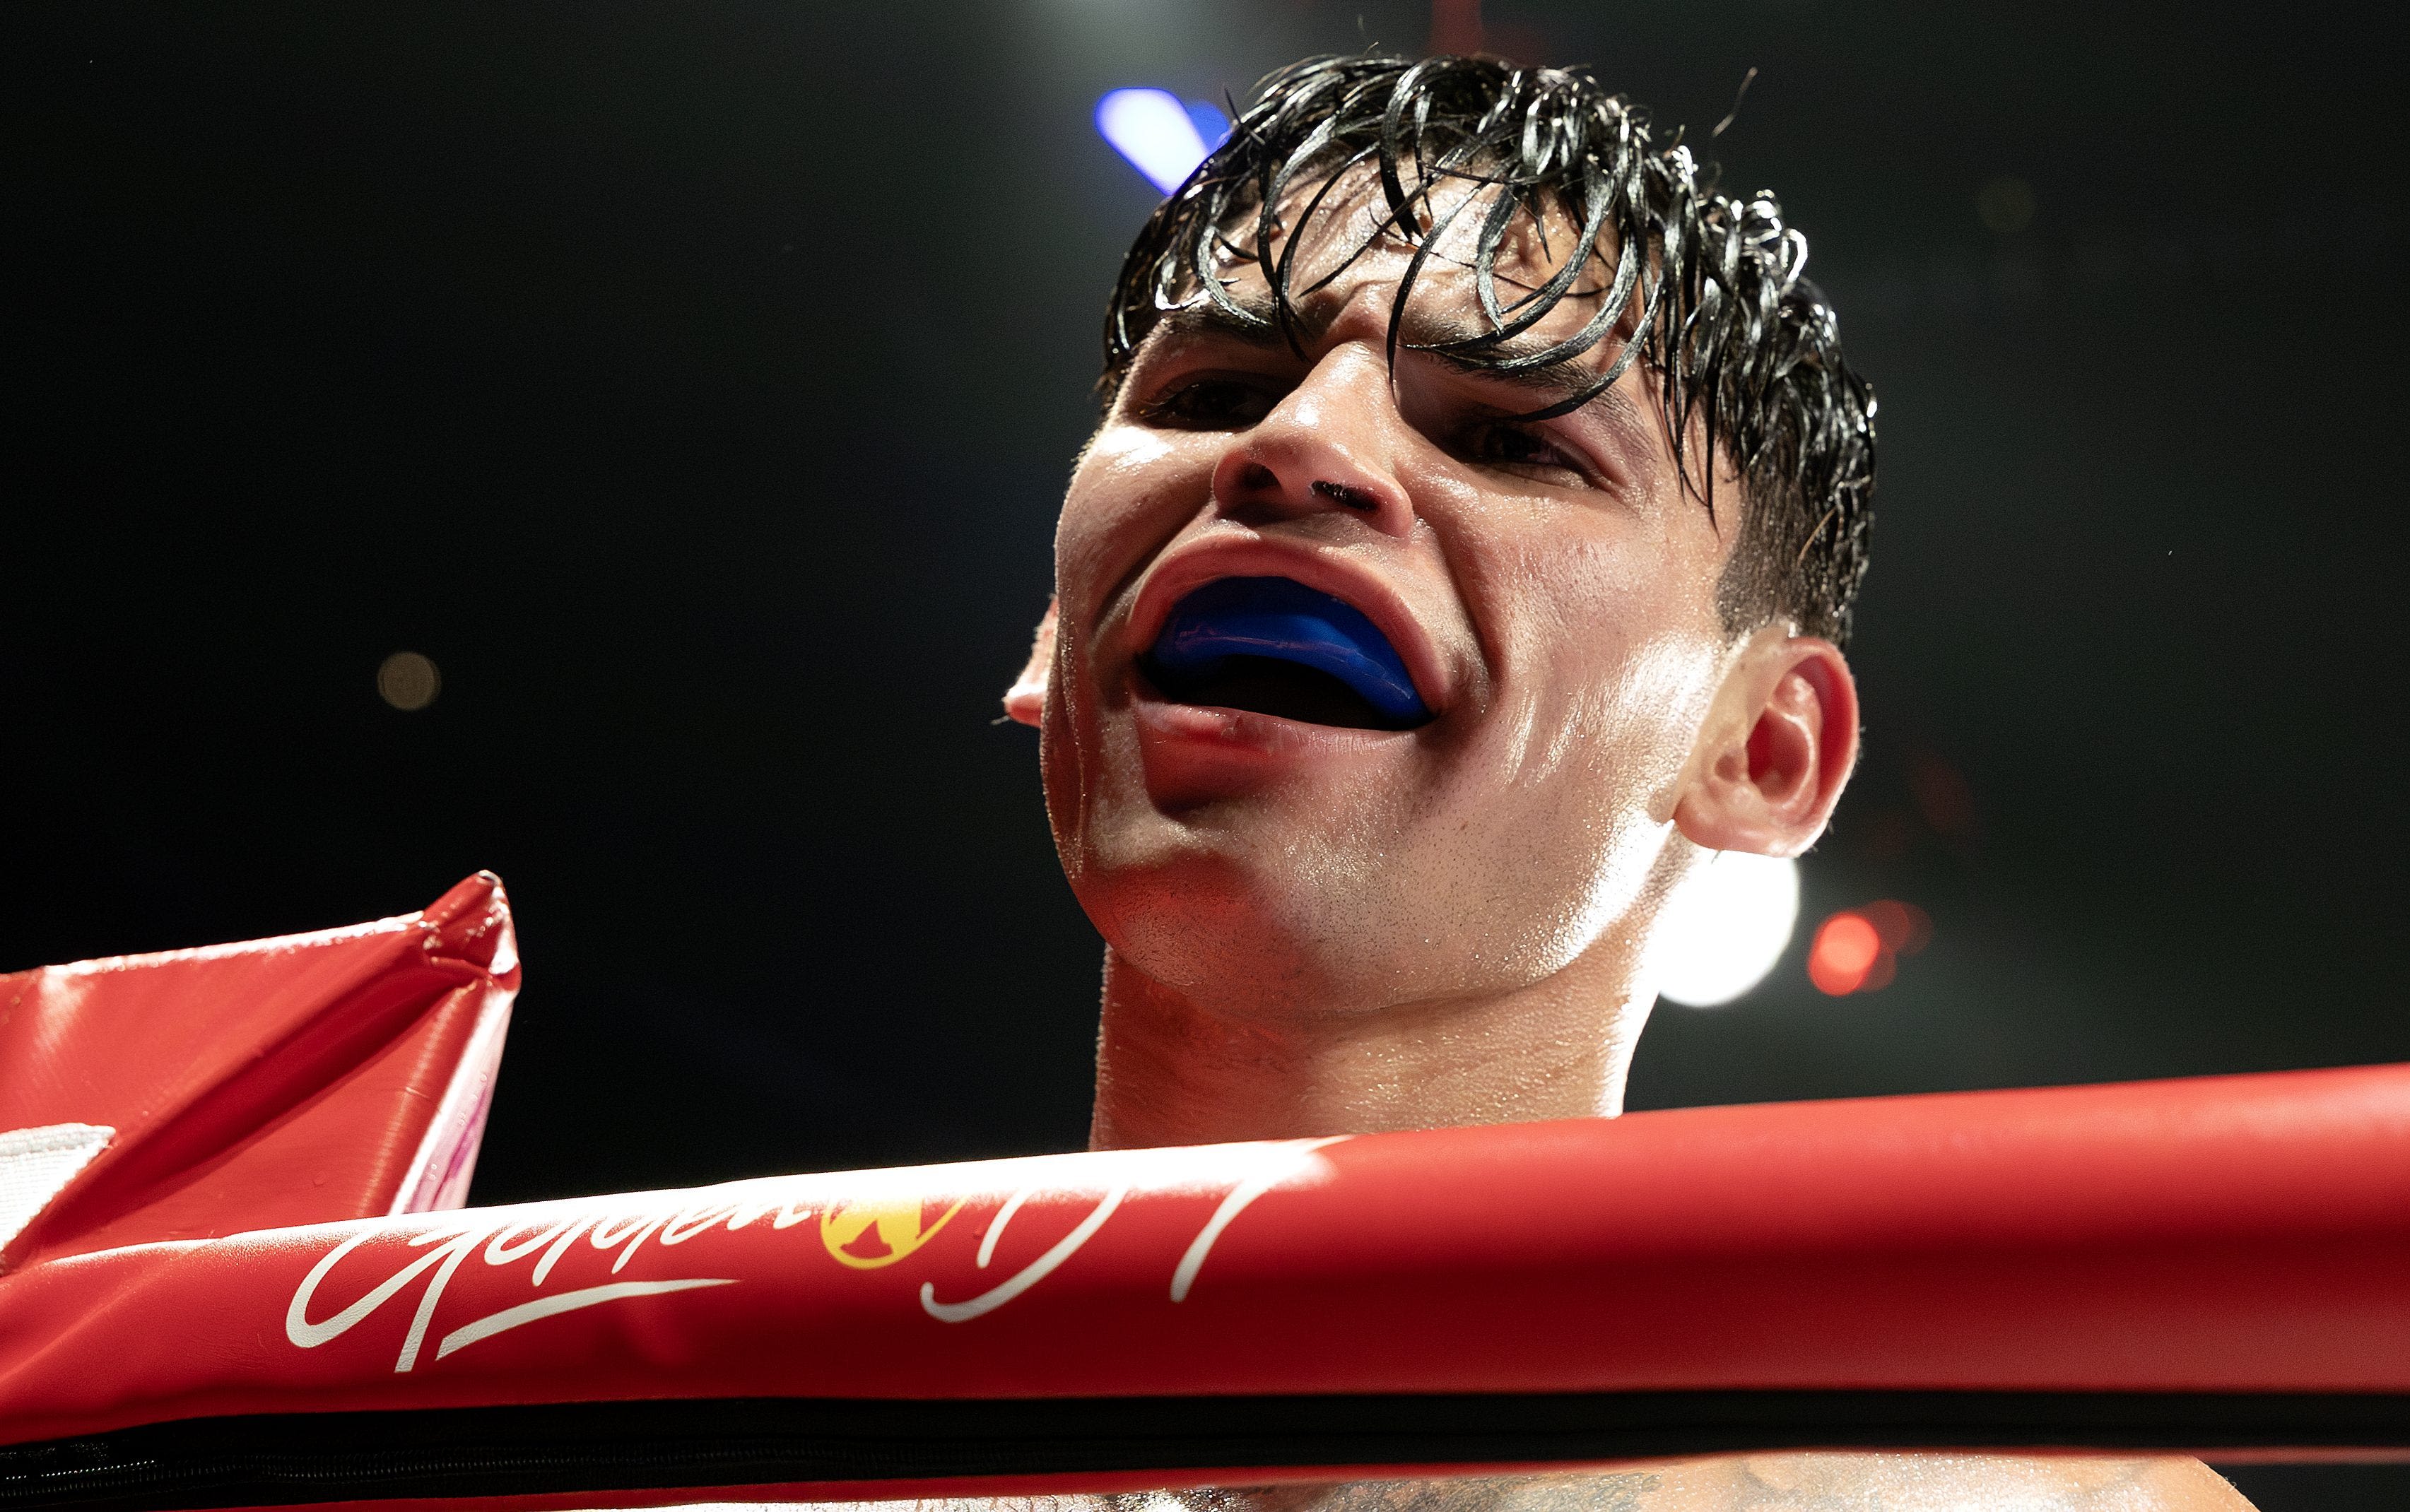 Reports: Ryan Garcia tested positive for banned substance before fight against Haney